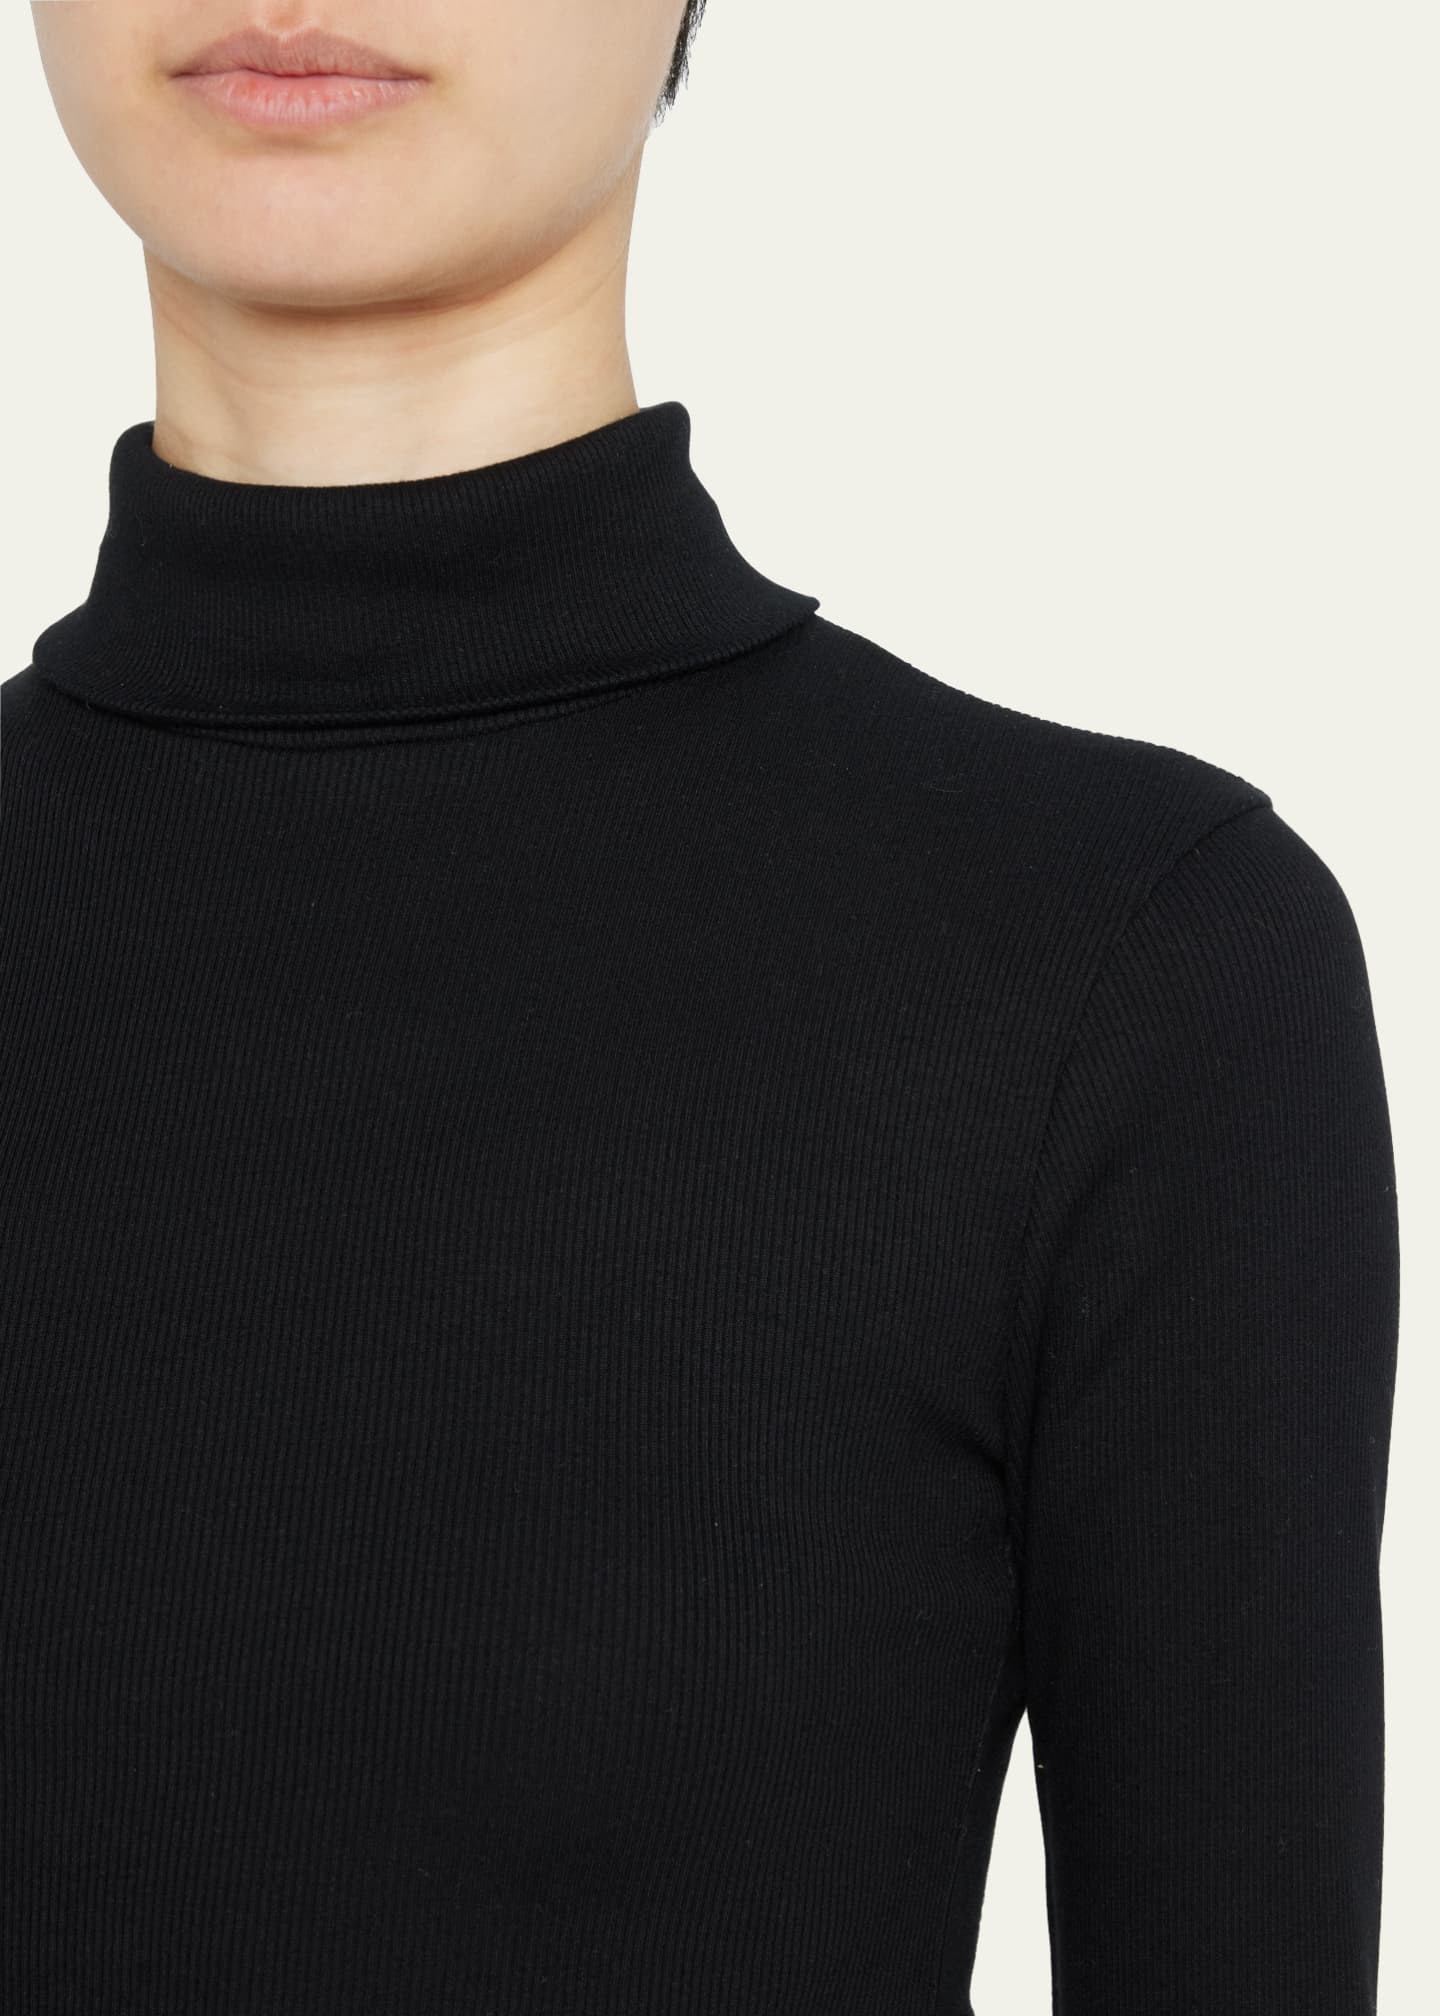 Eterne Cropped Fitted Turtleneck Top - Bergdorf Goodman